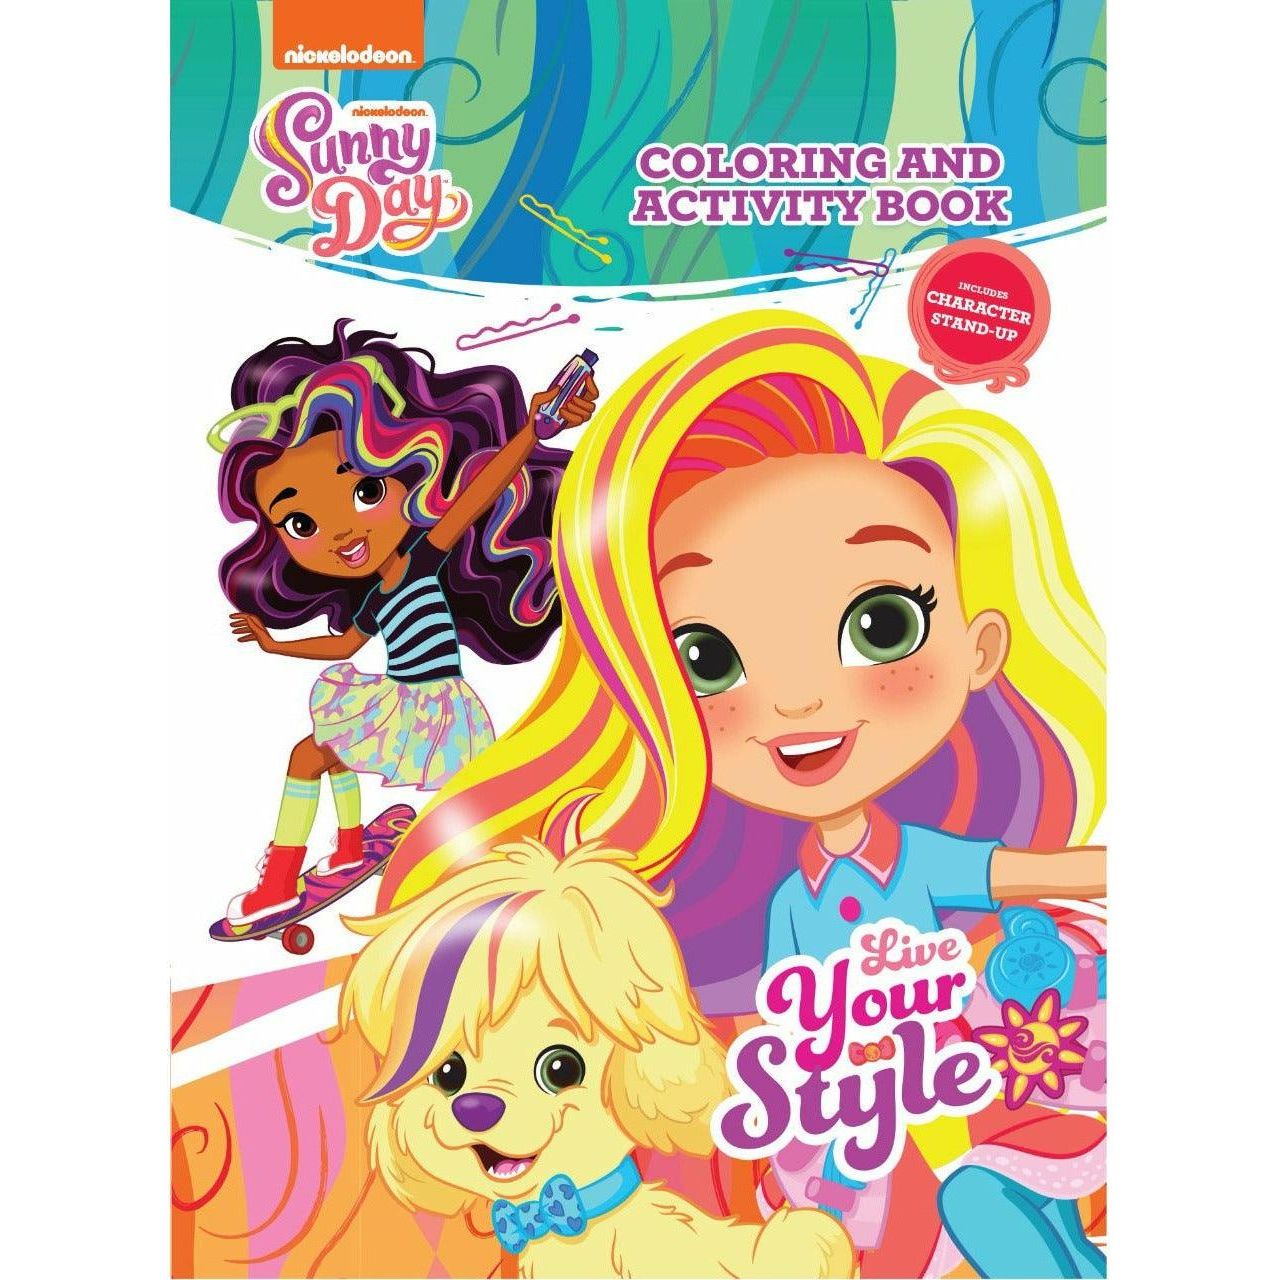 Nickelodeon Sunny Day - Live Your Style Coloring Book - BumbleToys - 2-4 Years, 5-7 Years, Drawing & Painting, Girls, Nahdet Misr